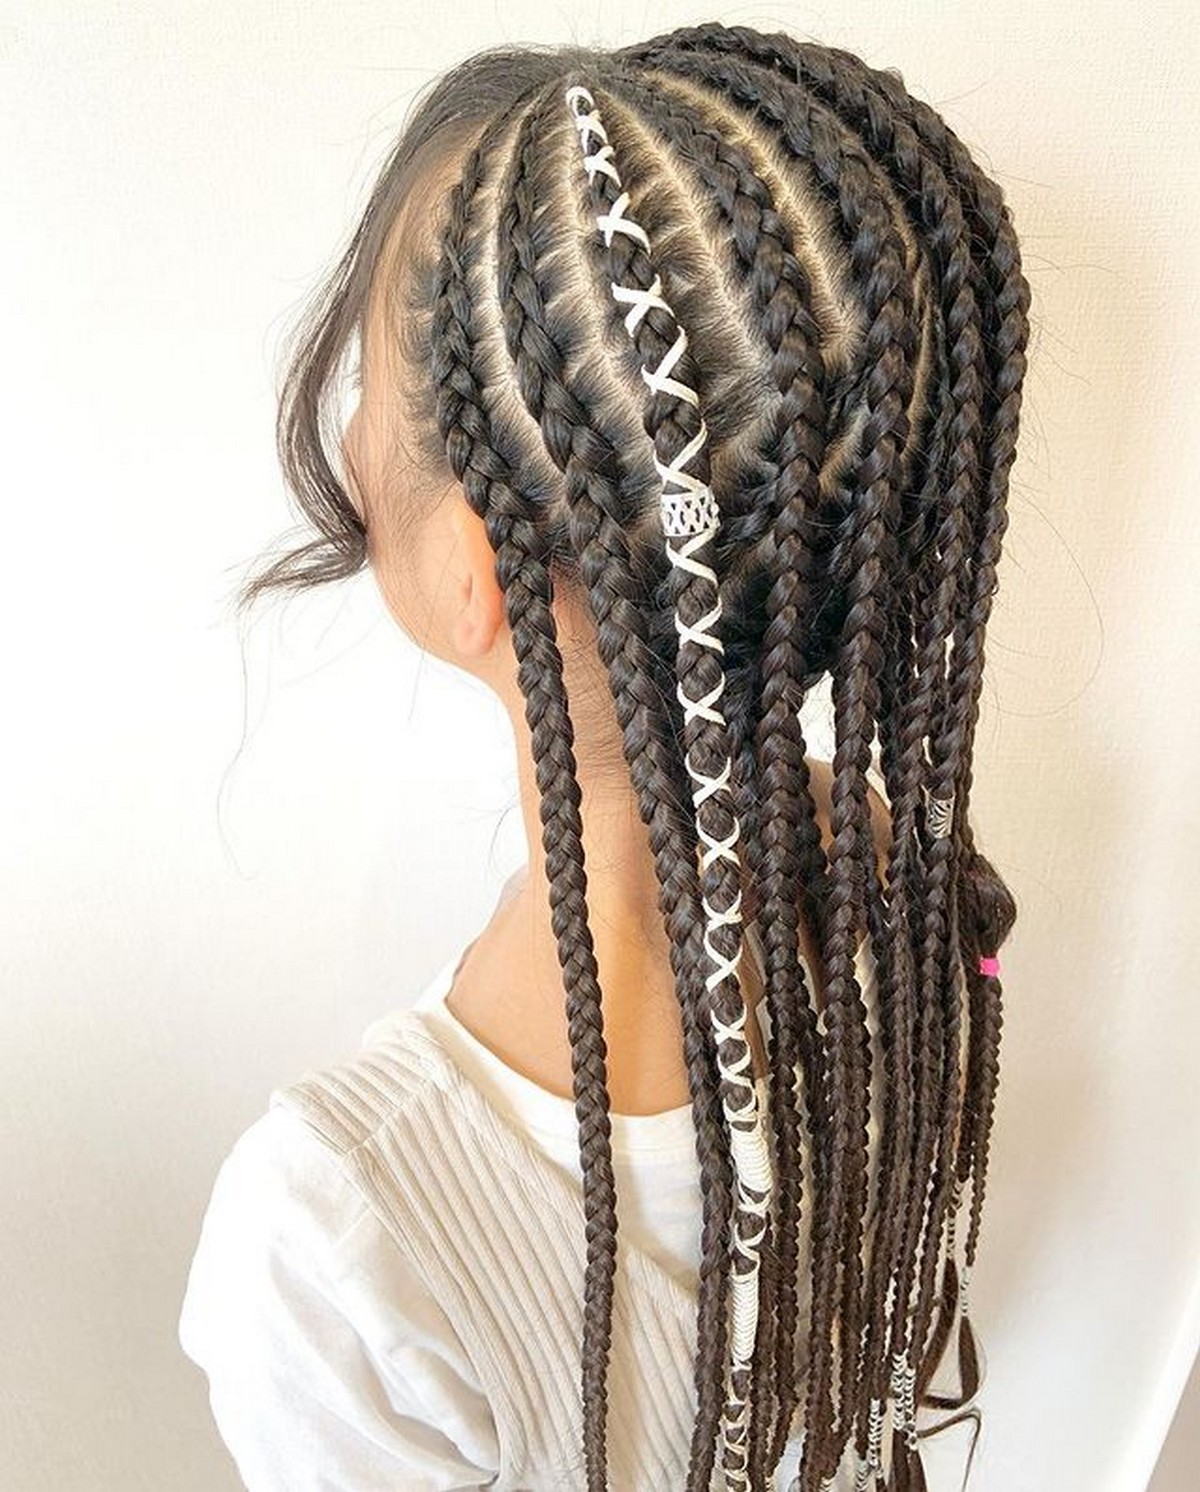 Long Cornrows with Braided Tails